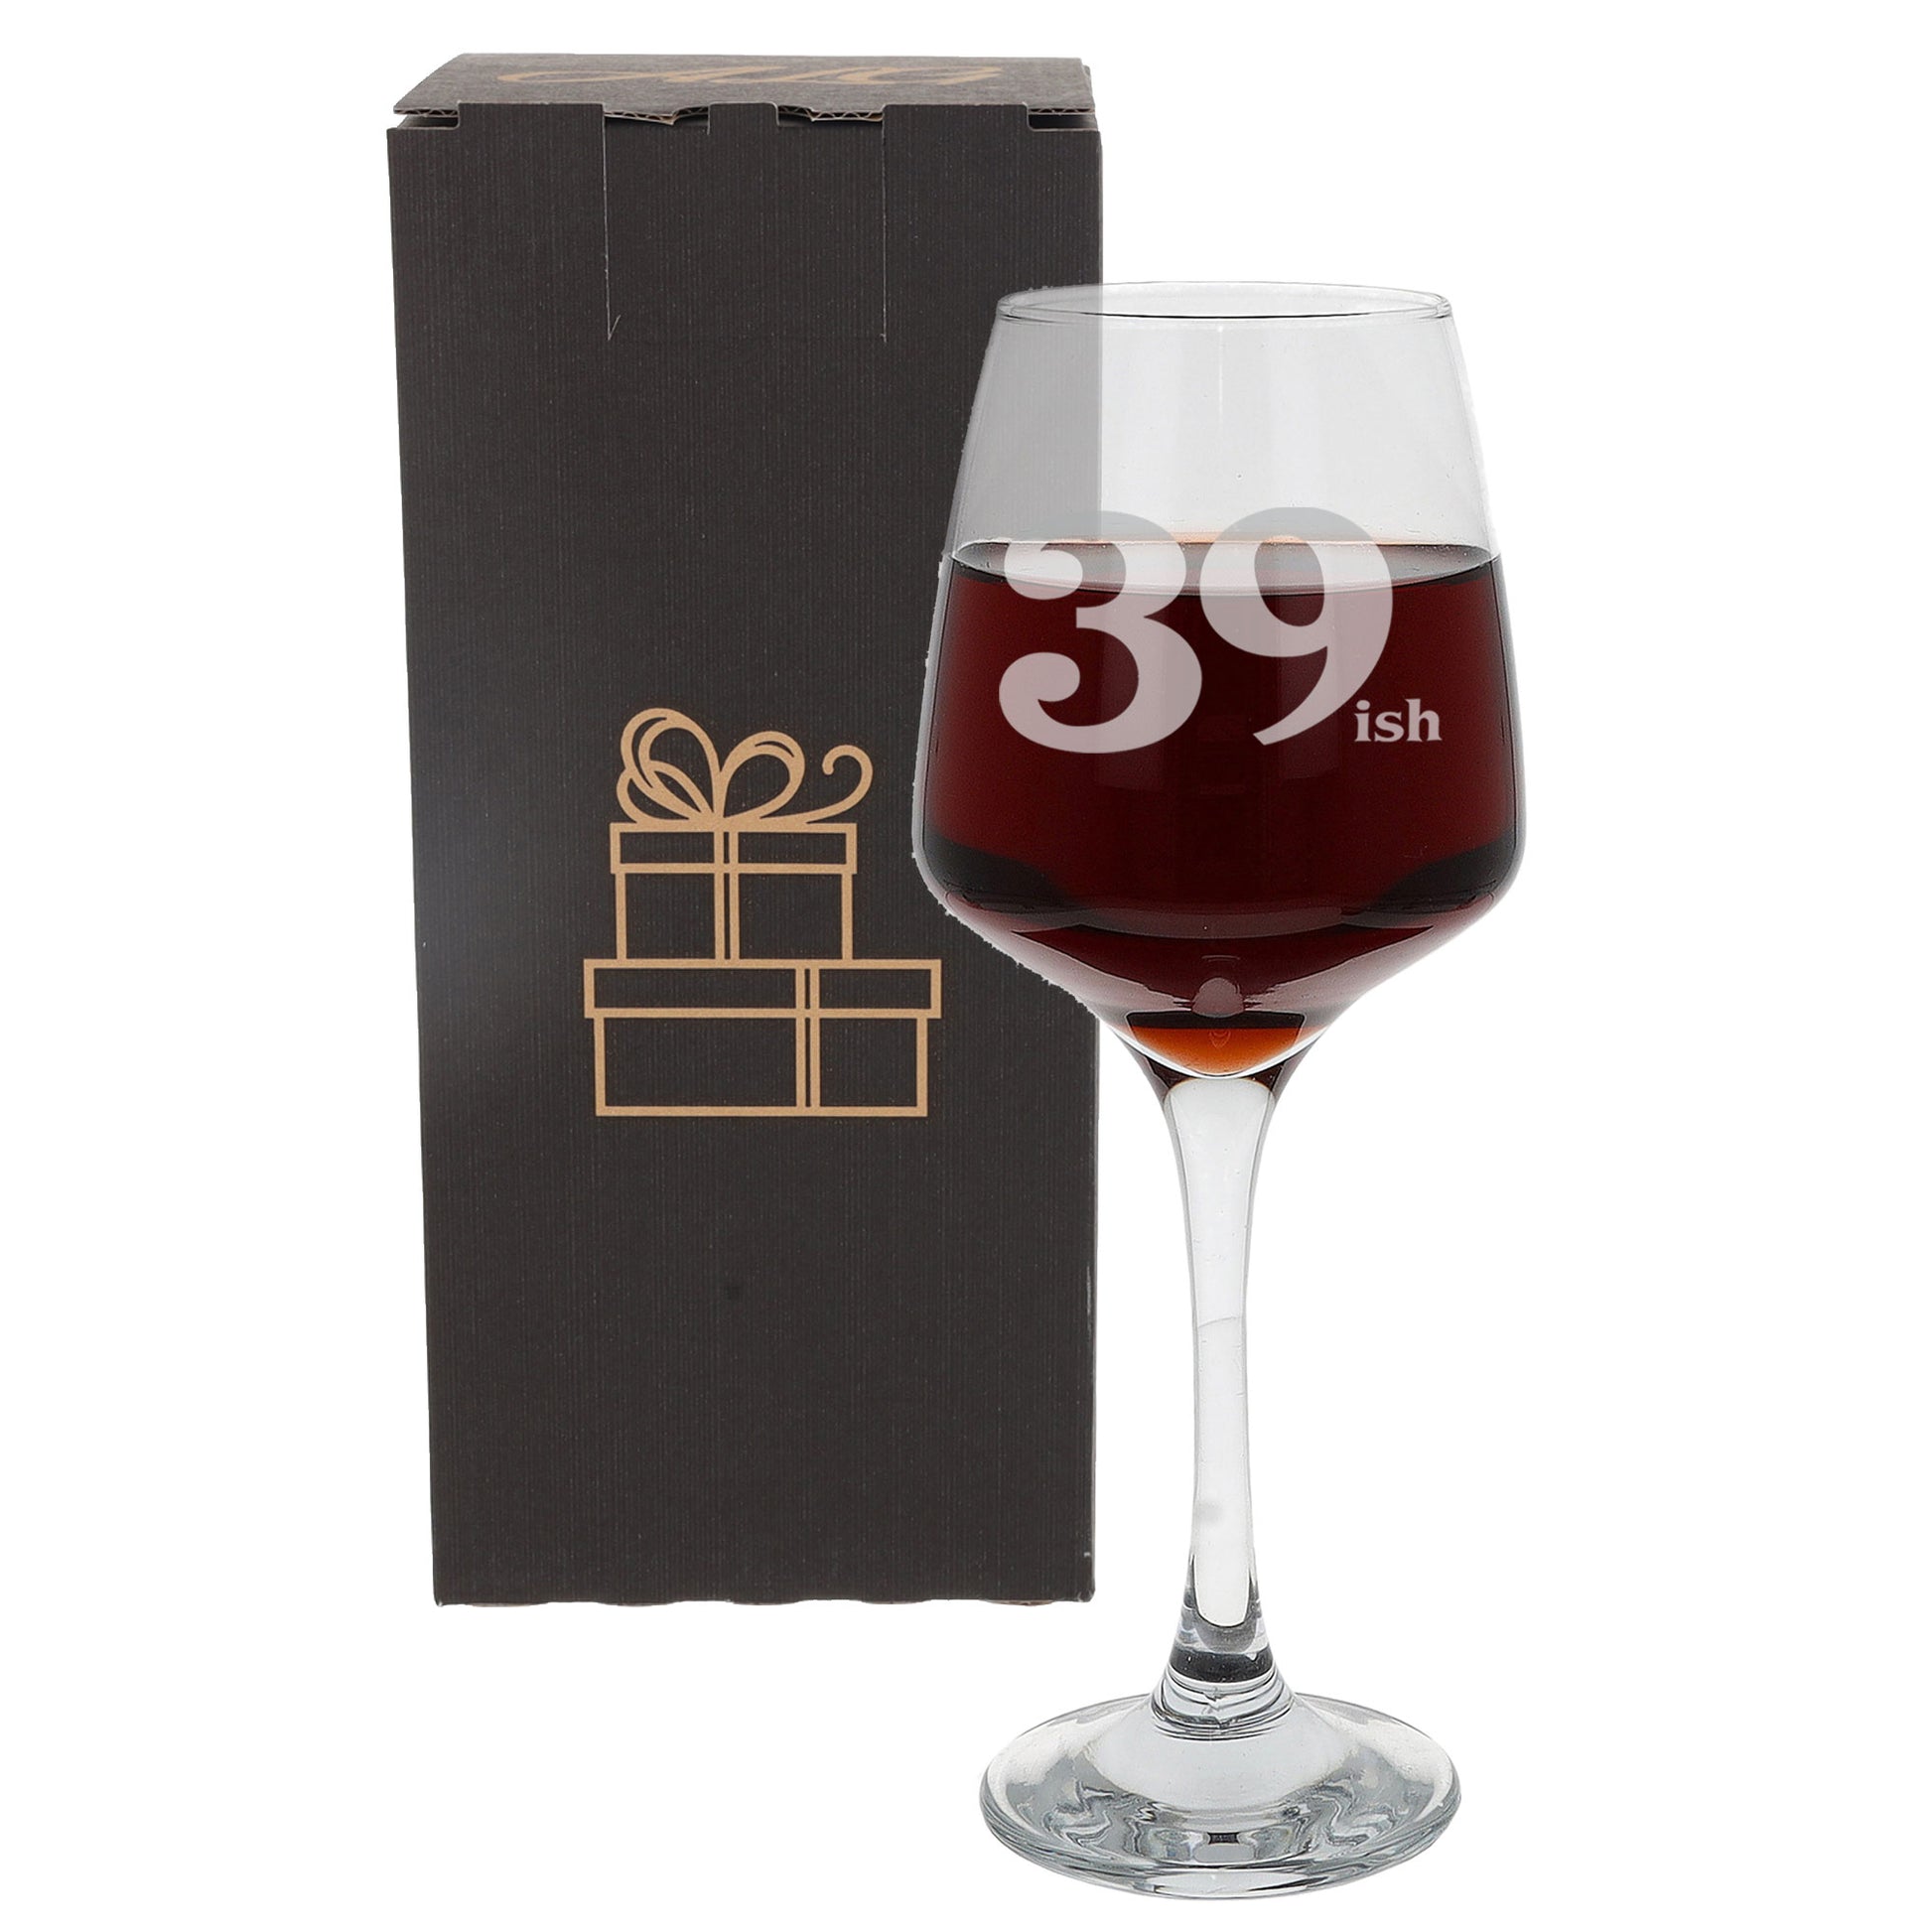 39ish Wine Glass and/or Coaster Set  - Always Looking Good -   